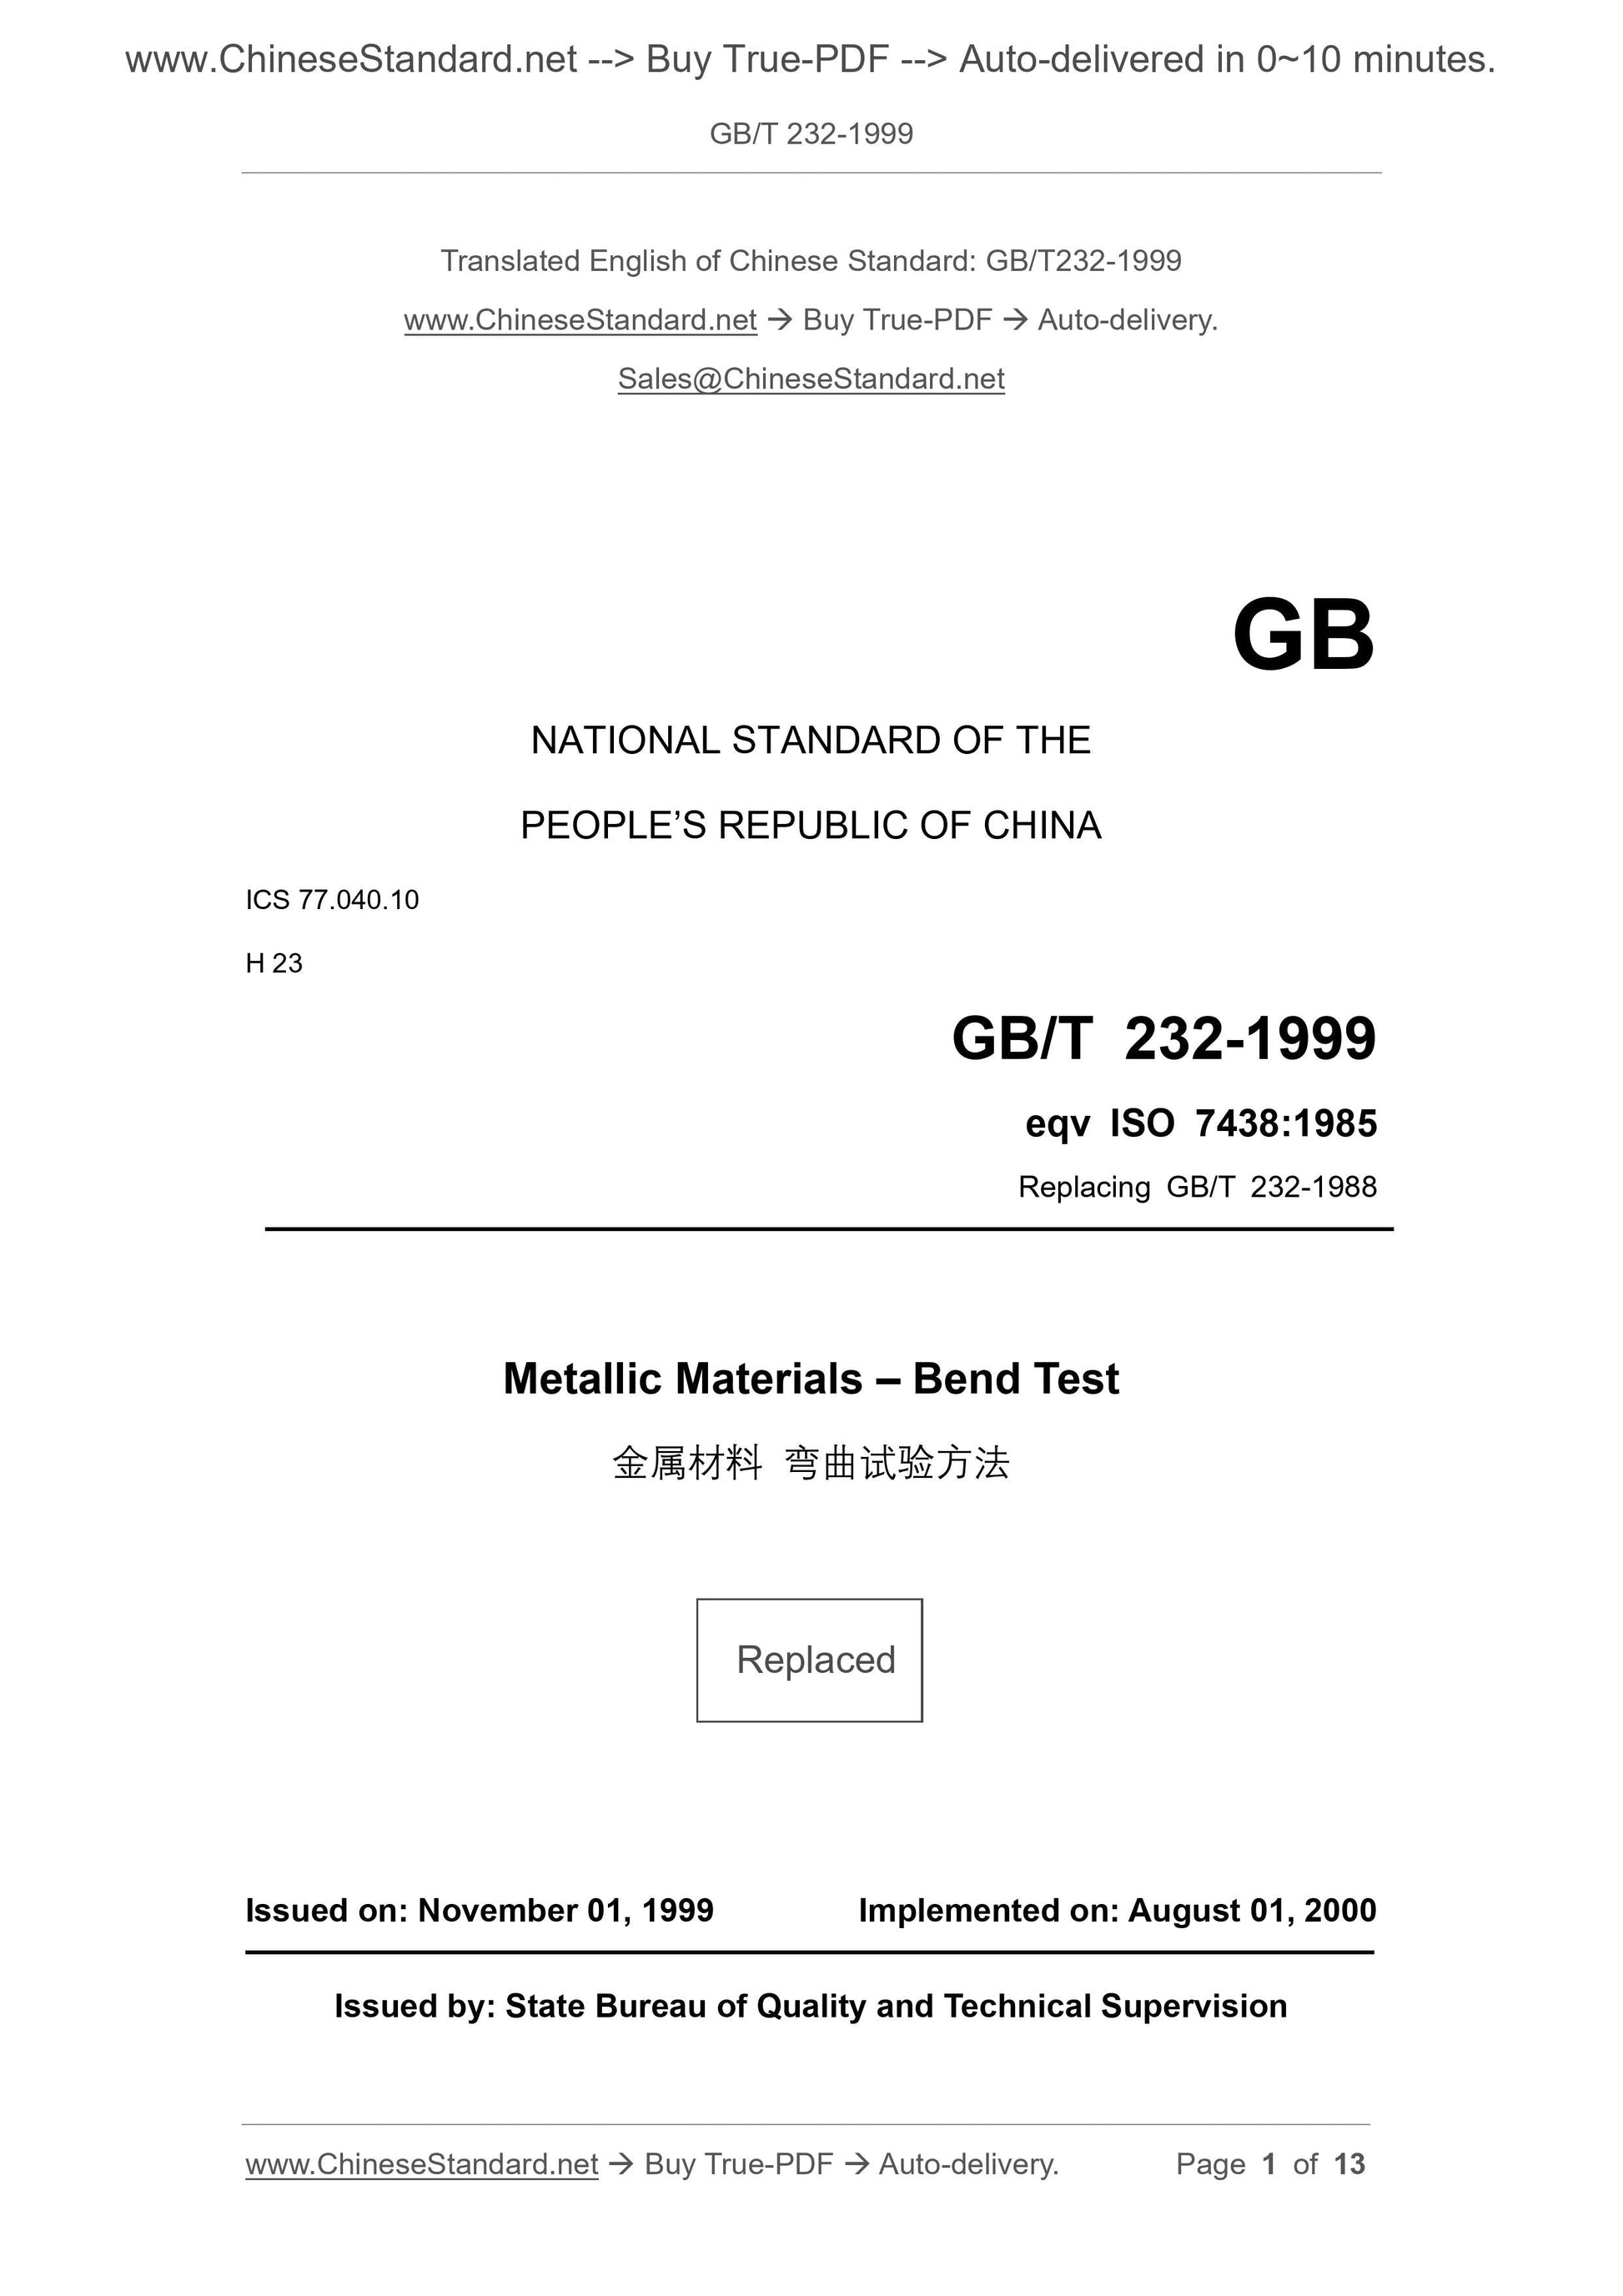 GB/T 232-1999 Page 1